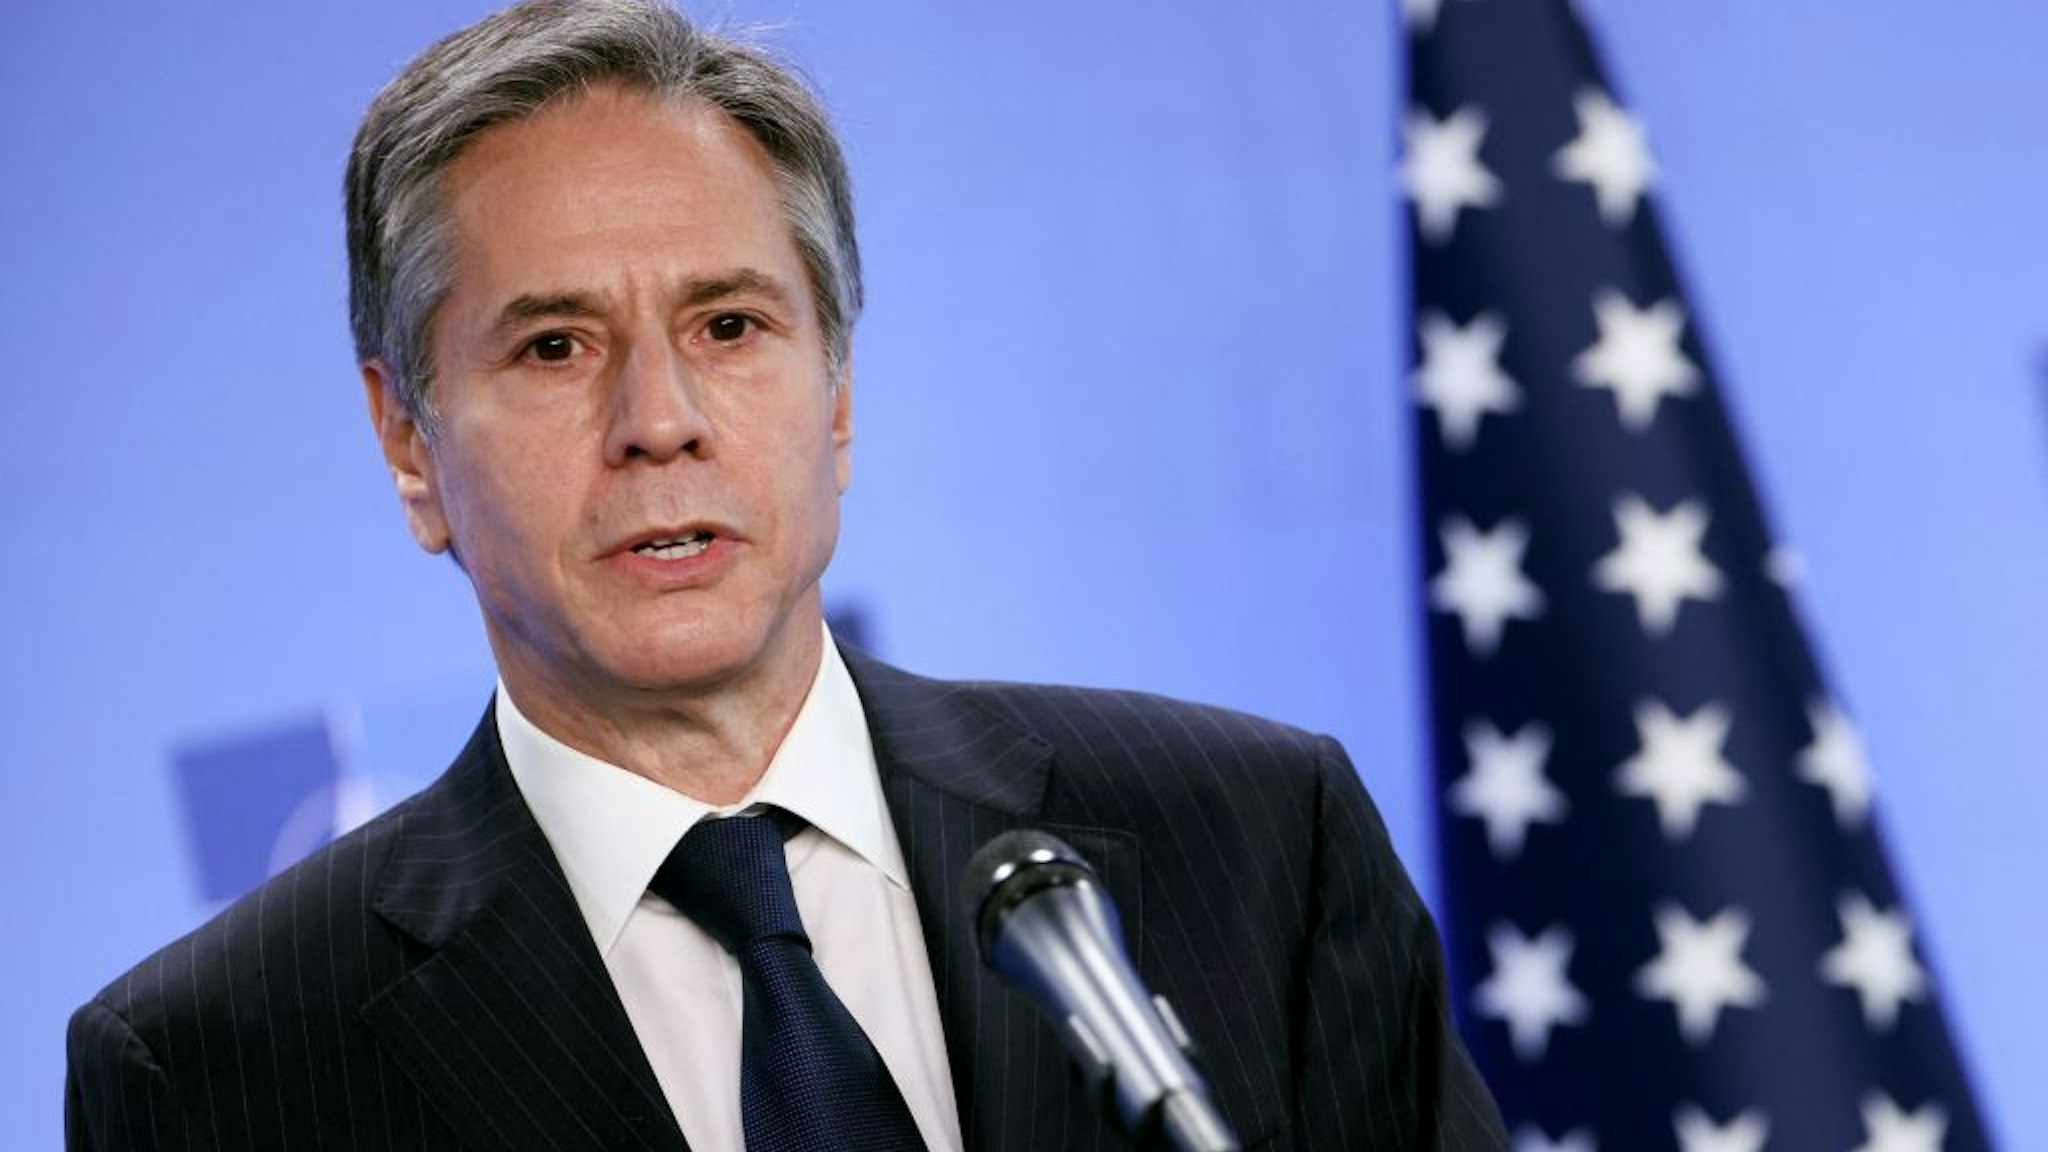 US Secretary of State Antony Blinken speaks during a press conference with transatlantic alliance NATO's chief on April 14, 2021 at NATO's headquarters in Brussels, as foreign ministers of the US, Britain, France and Germany hold talks today on Afghanistan, after the United States announced the withdrawal of all its troops from the country by September 11.